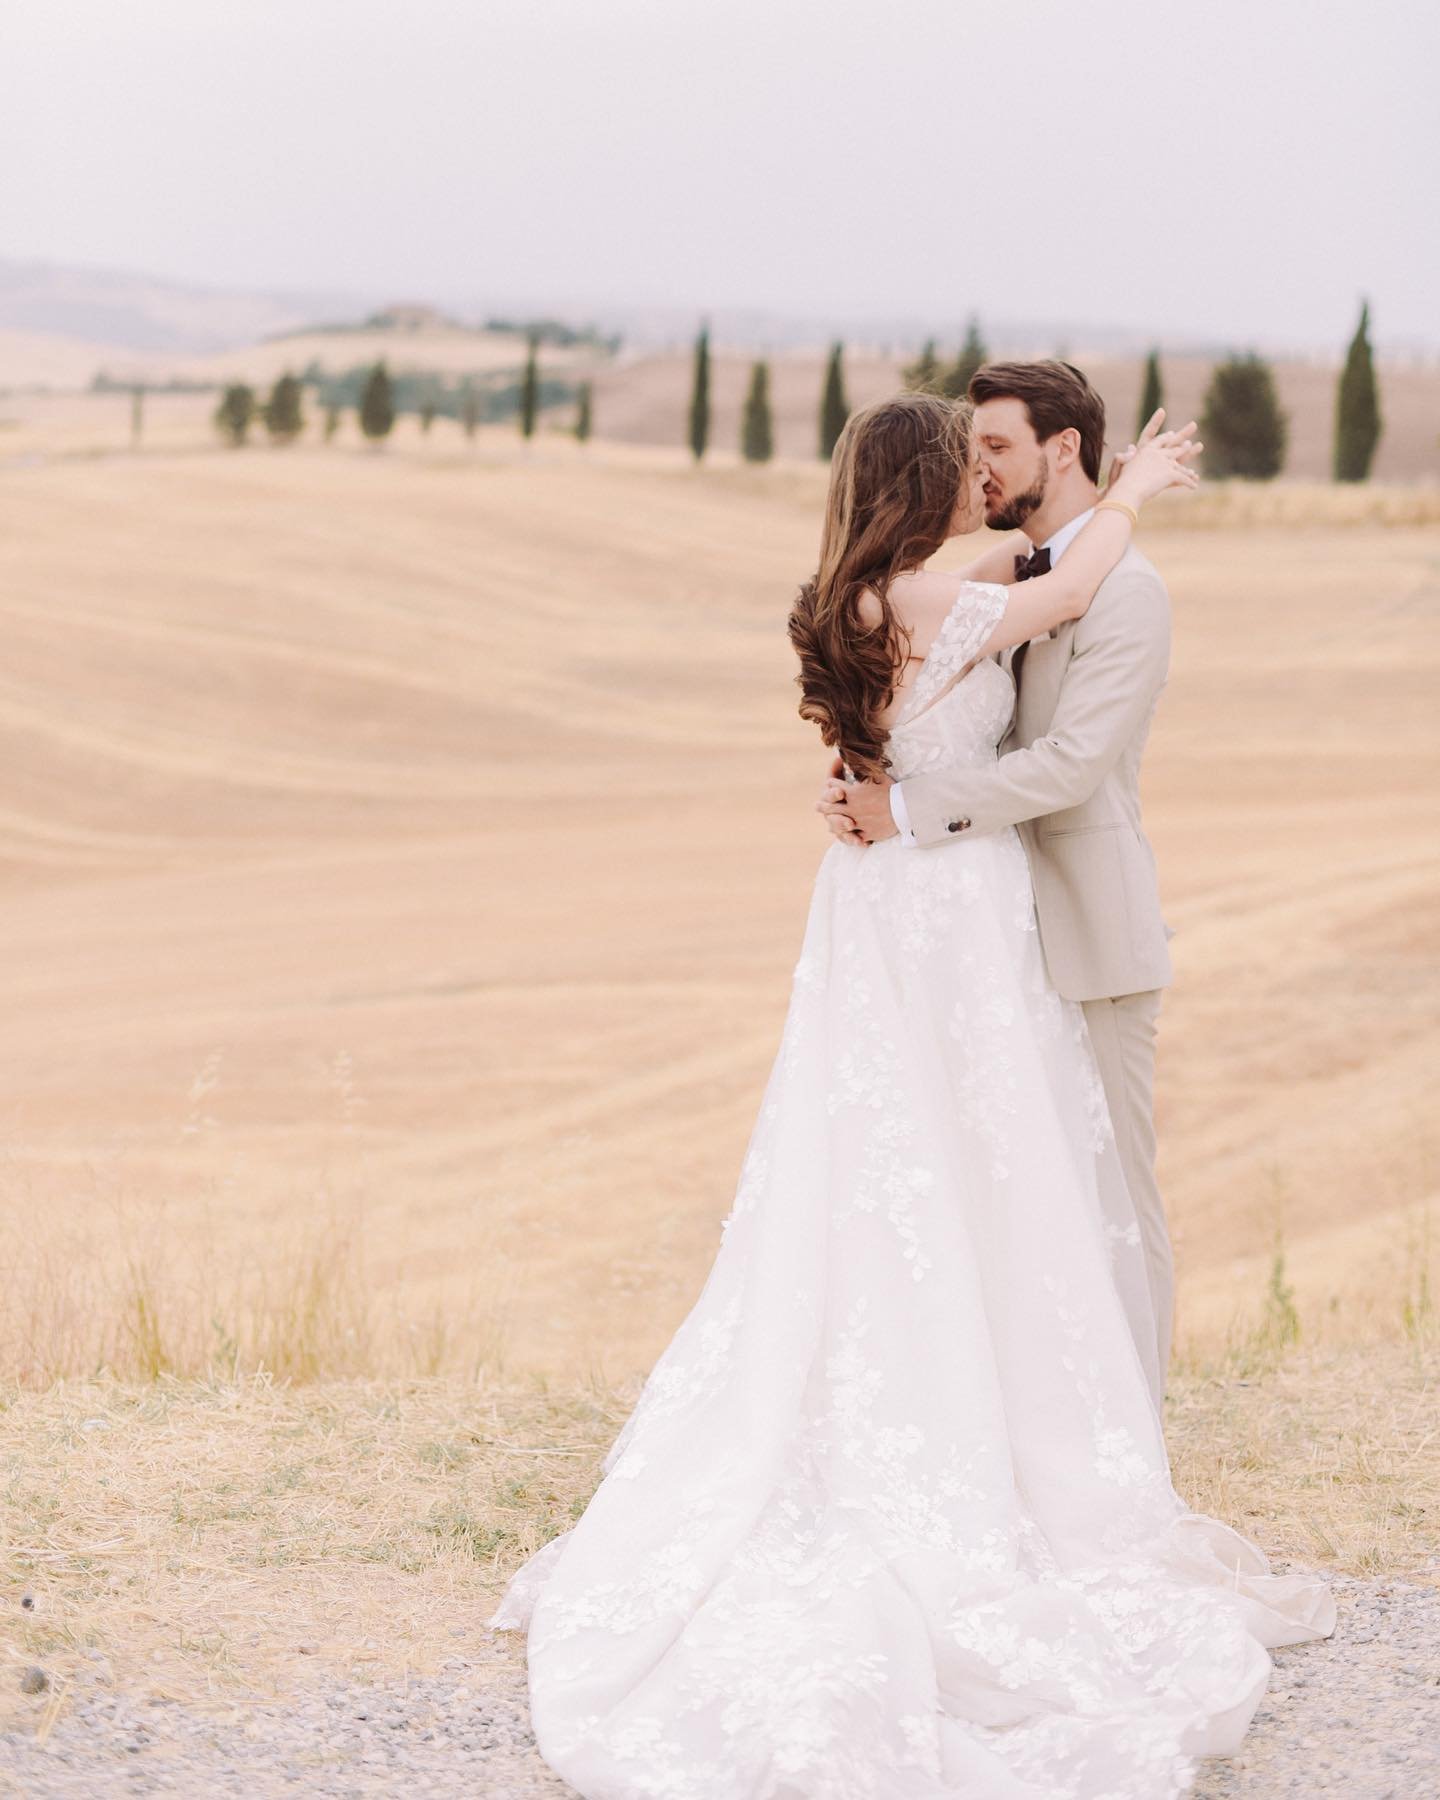 A romantic example of how the Val d&rsquo;Orcia is the perfect postcard to frame two lovers. 

Wp: @benitalyweddings 
Venue: @borgosantambrogio 
Flowers: @lepetitjardinitaly 
Video: @waterfallvisuals_videography 
Dress: @martinalianabridal 
Suit: @su